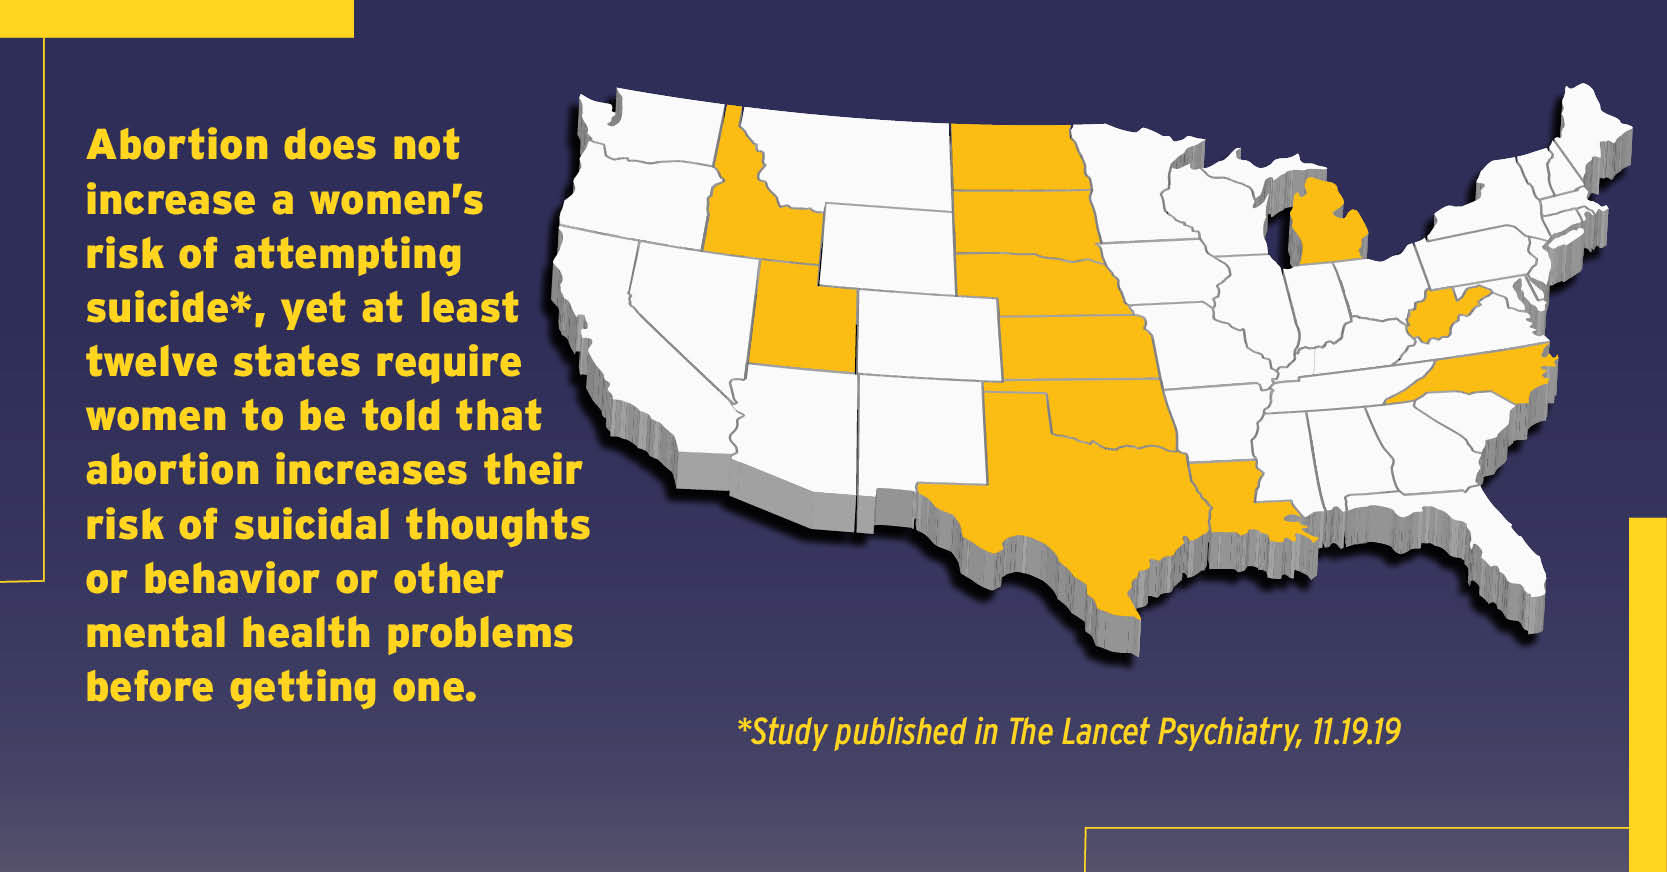 Graphic about states that require women to be told abortion increases suicide risk.